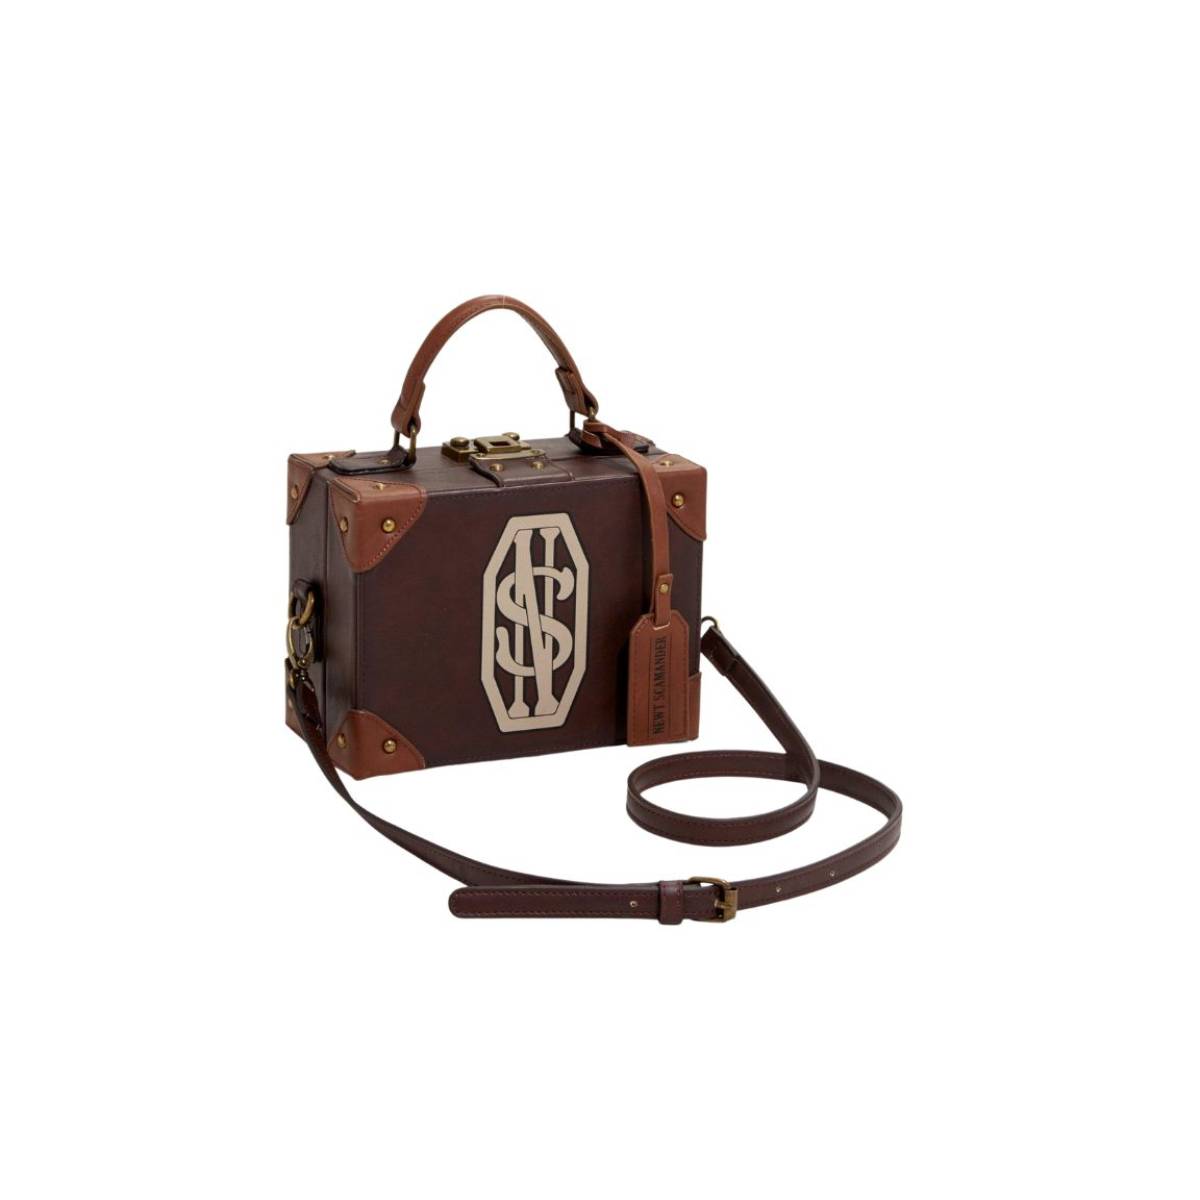 BIOWORLD FANTASTIC BEASTS AND WHERE TO FIND THEM NEWT TRUNK HANDBAG